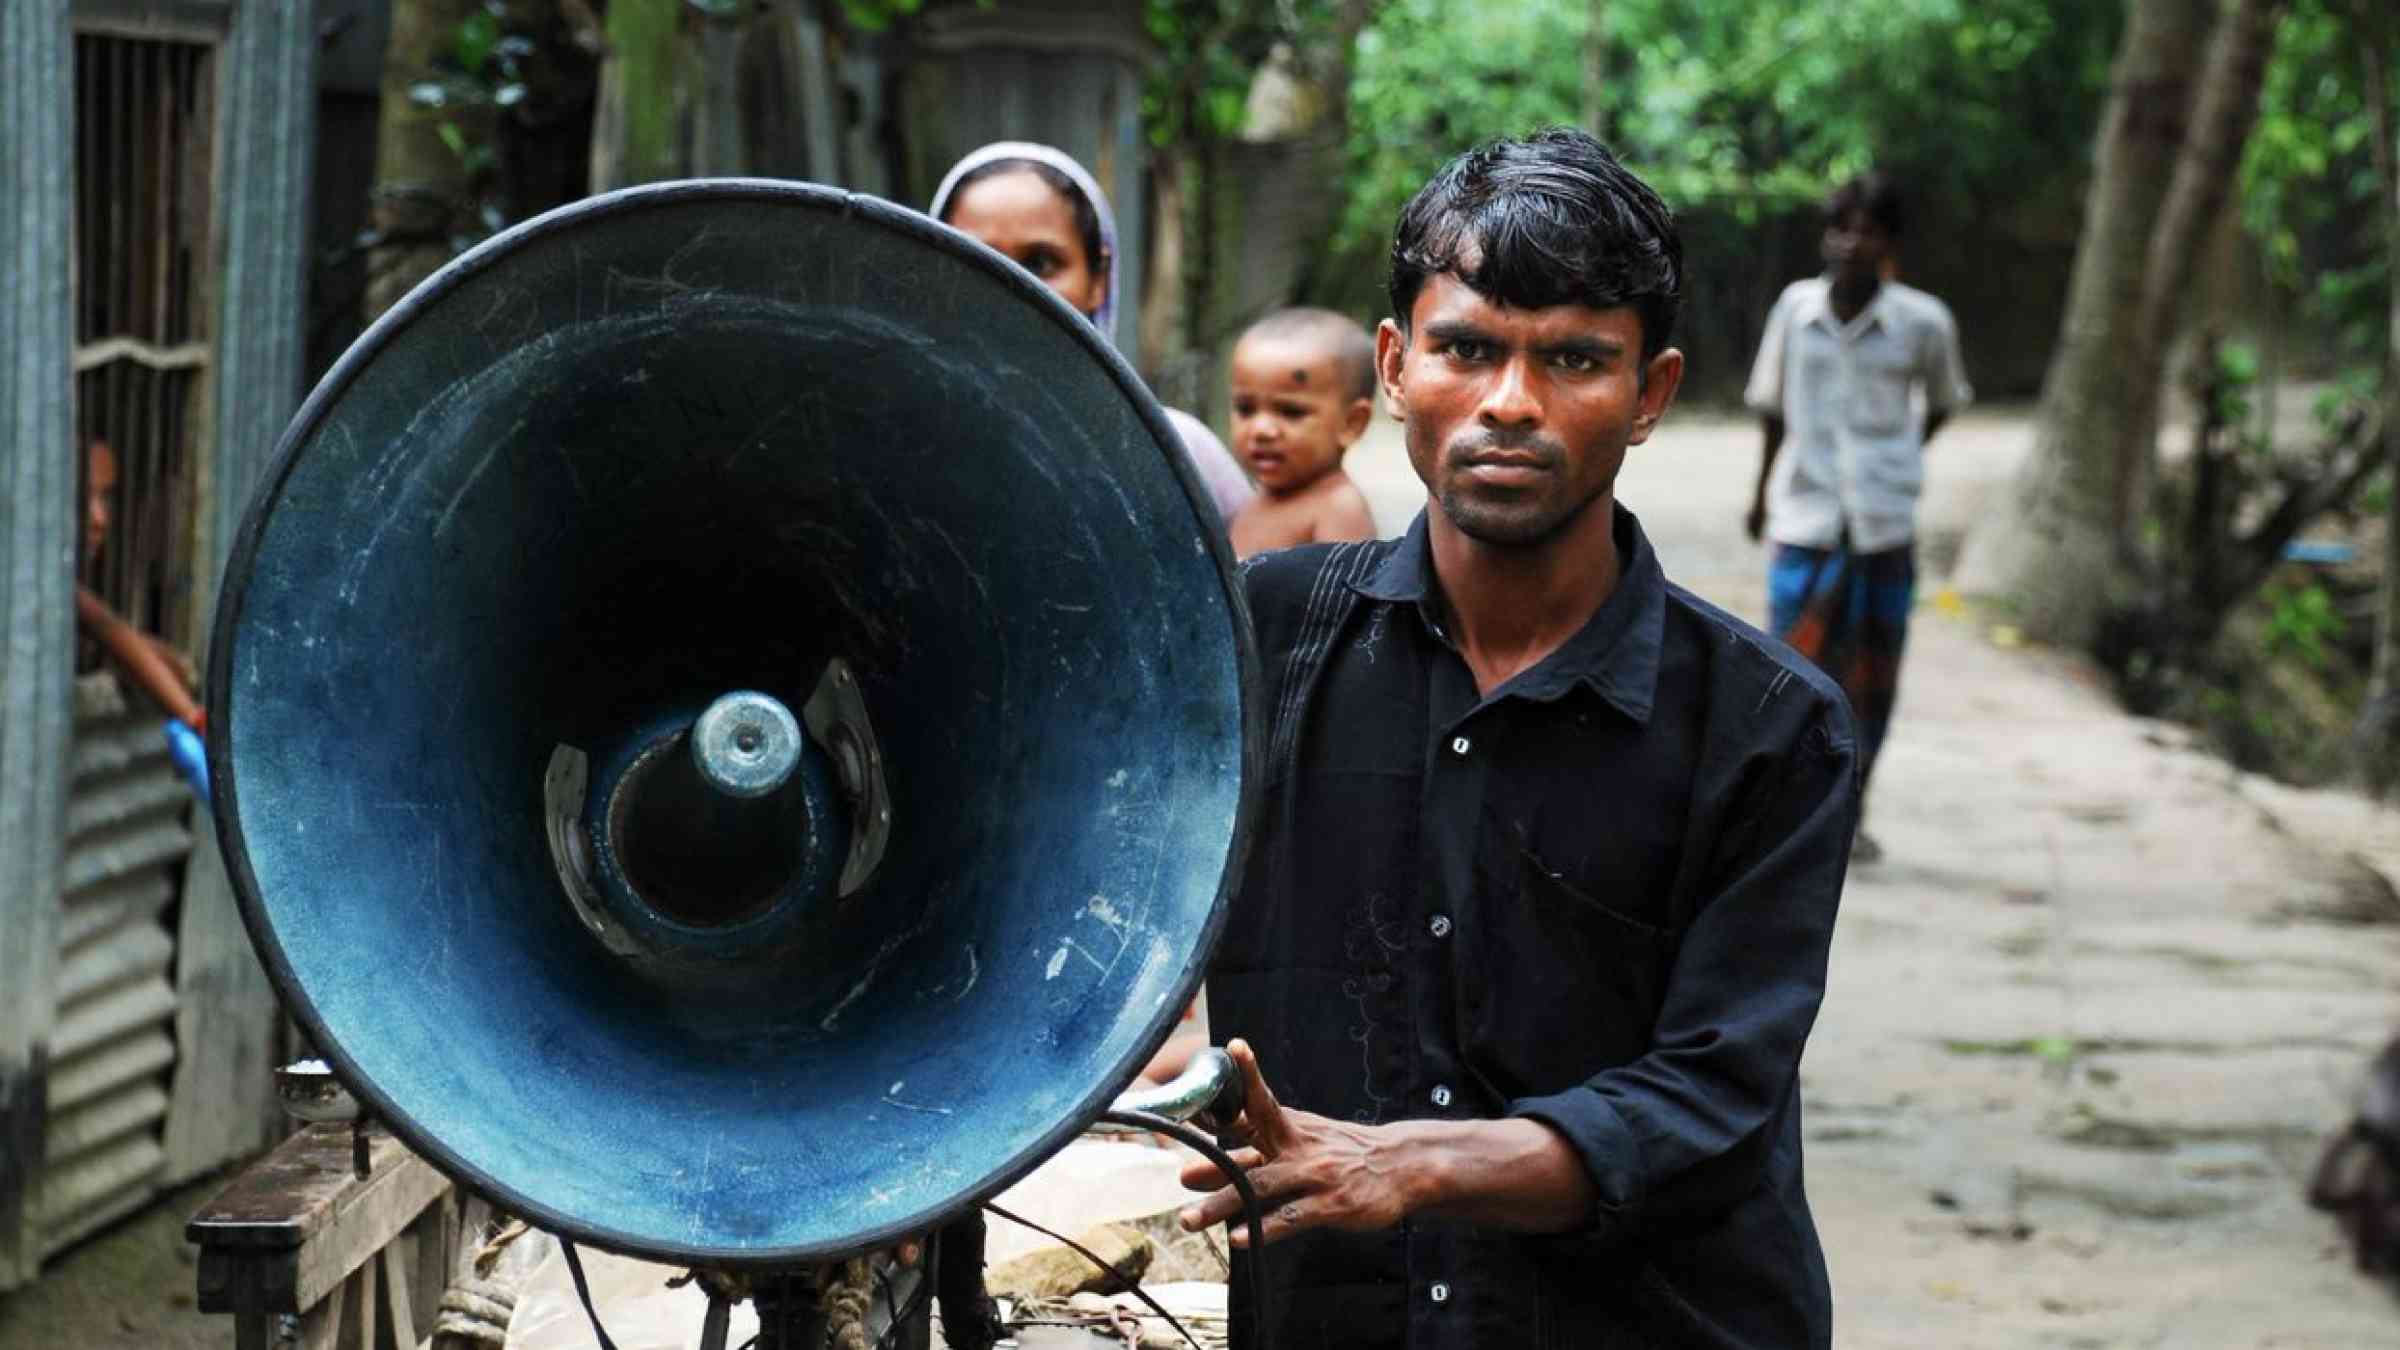 Man holding a loud speaker for early warning in Bangladesh.